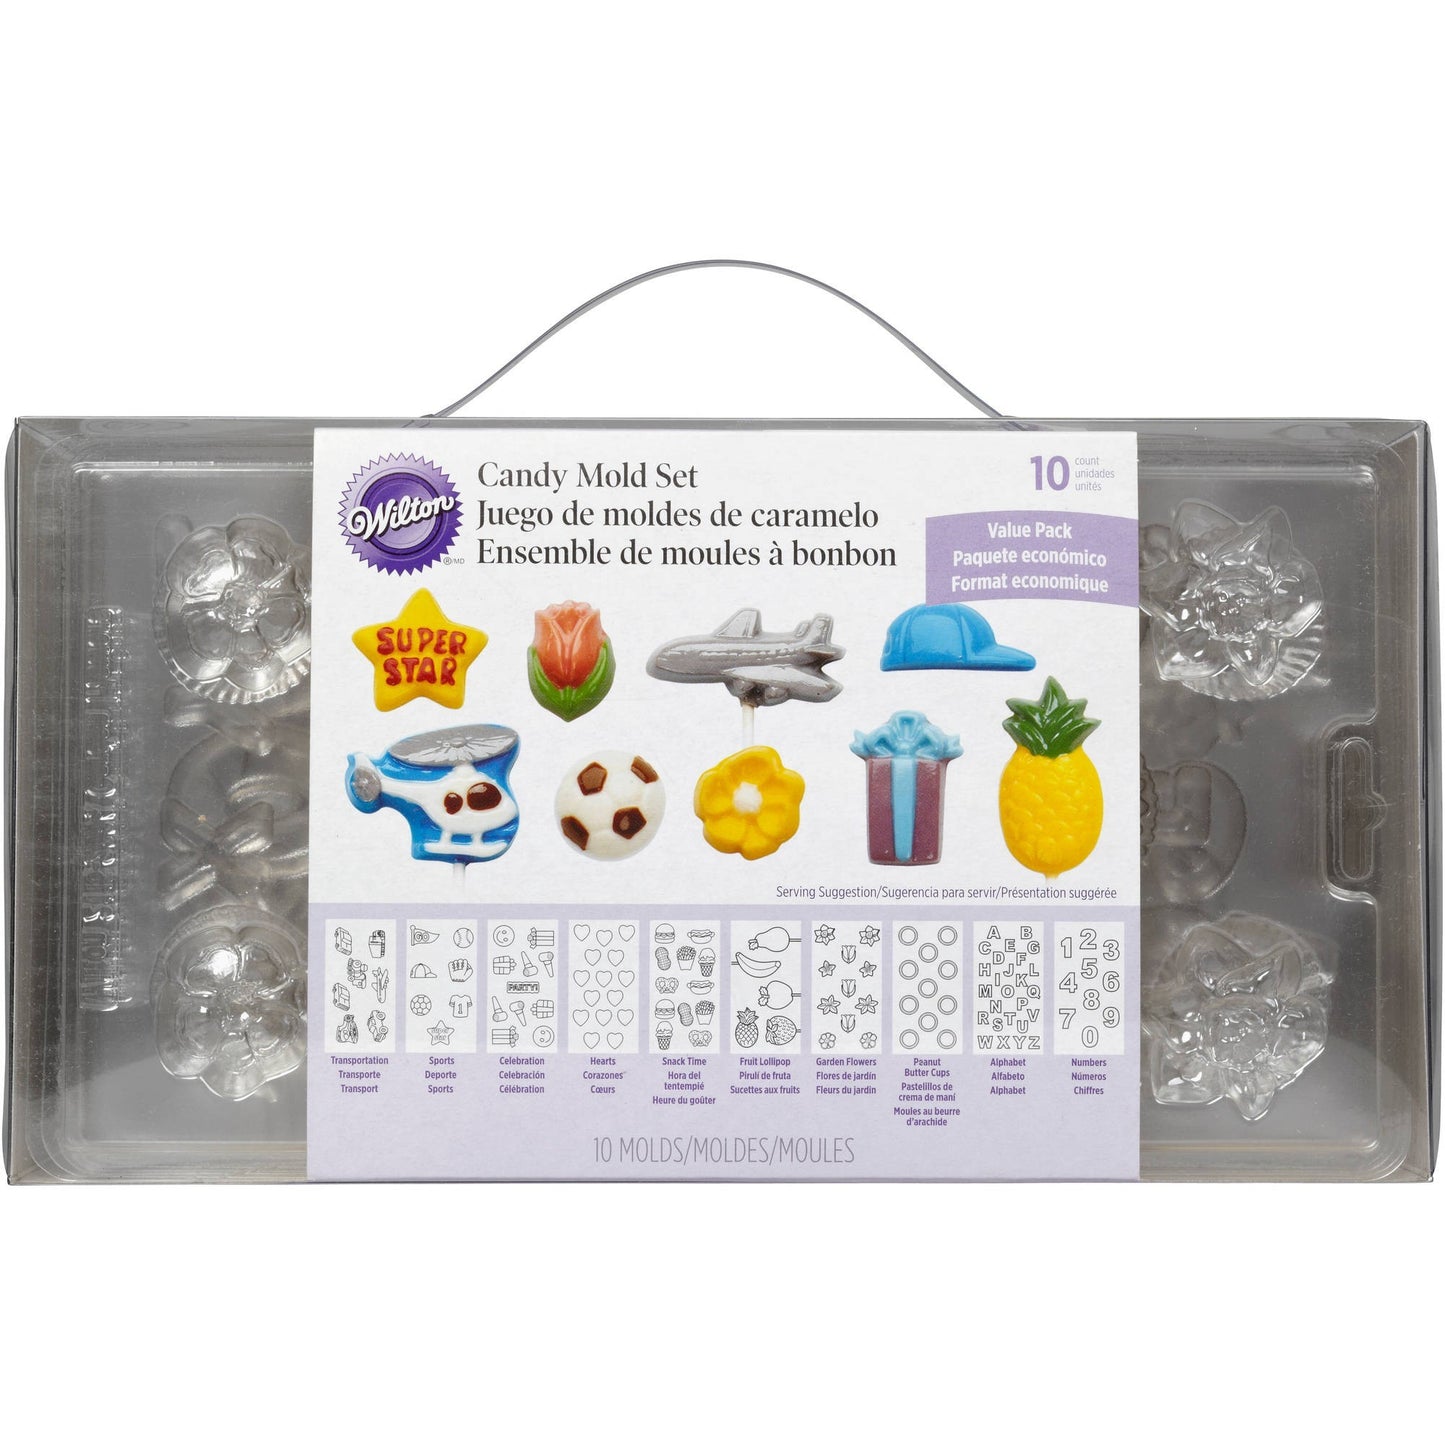 Chocolate mould variety set 10 moulds by Wilton